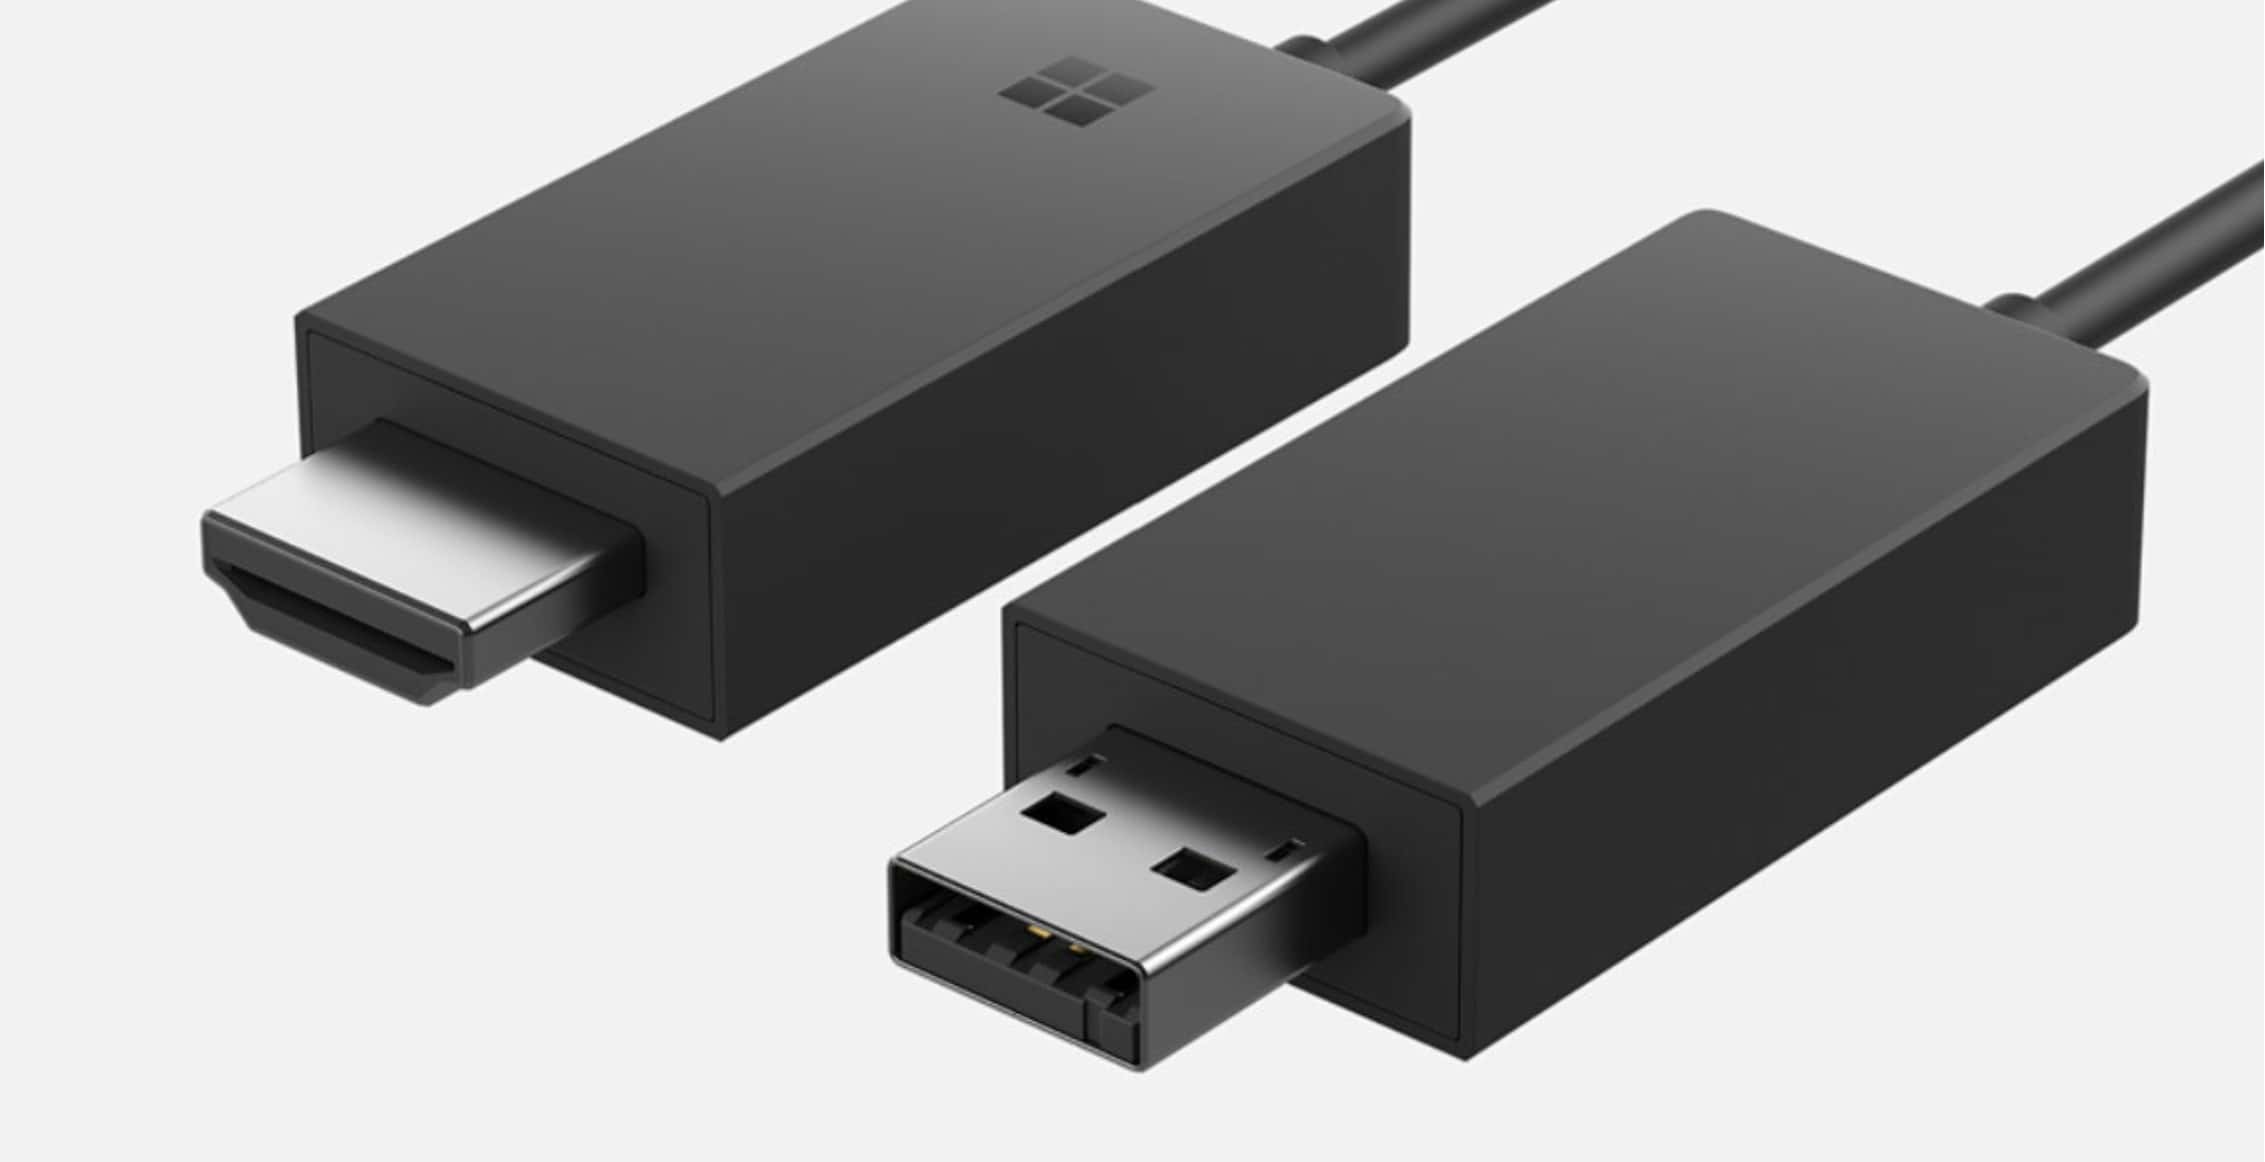 Microsoft stops selling Wireless Display Adapter accessory